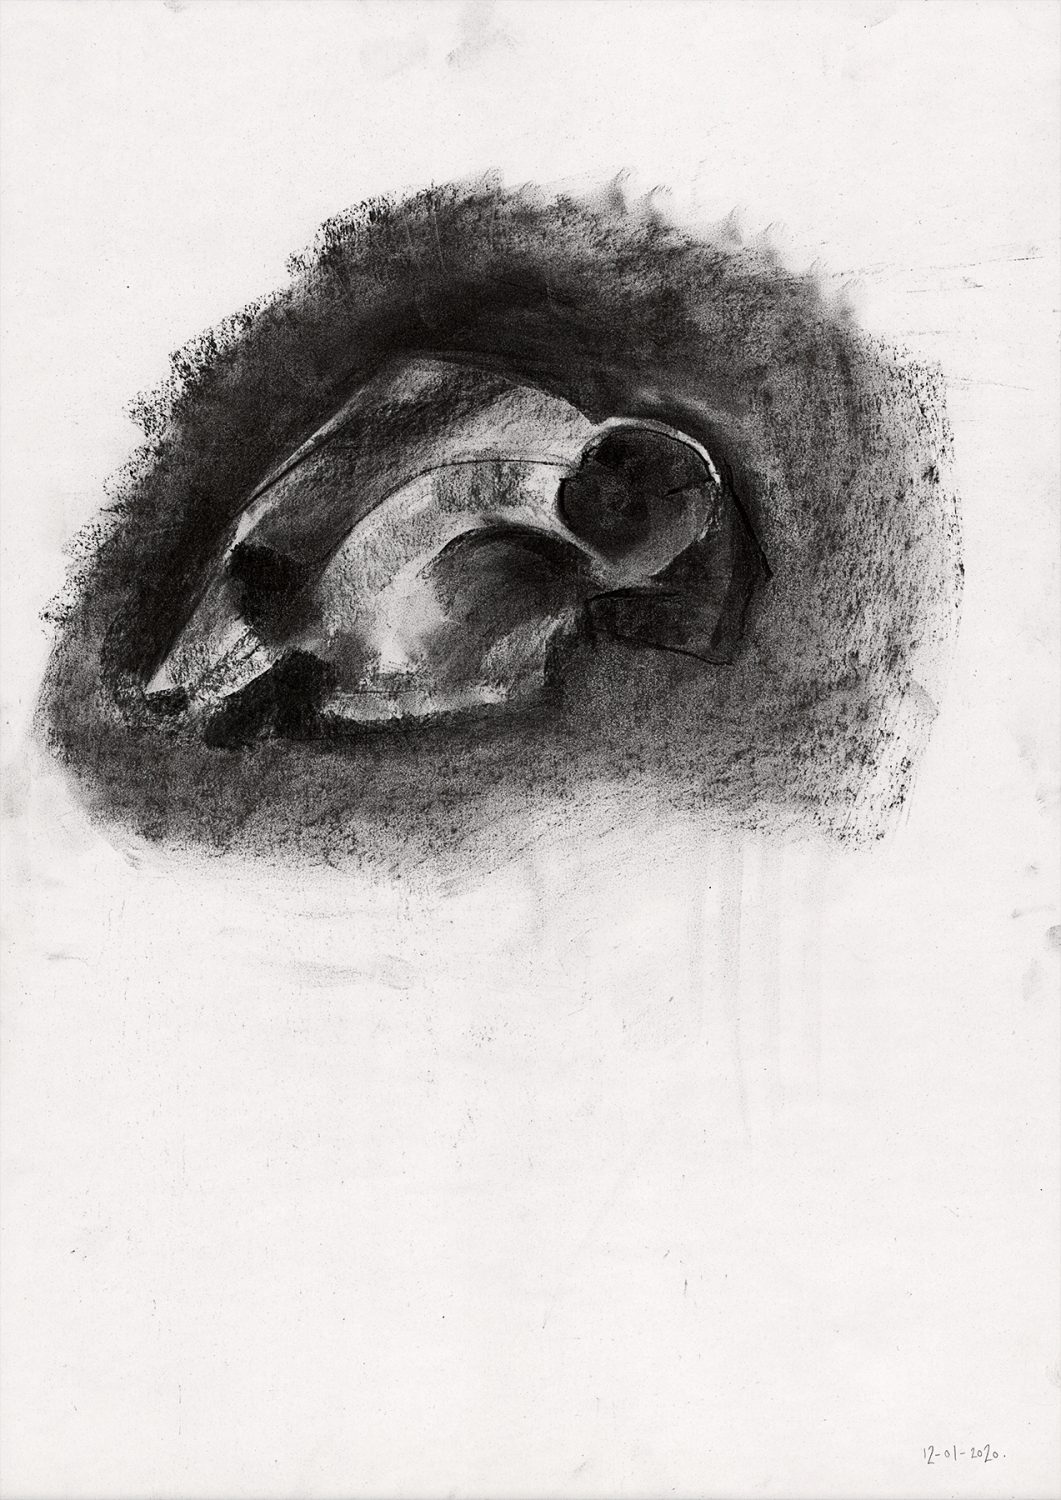 Stacey Lewis - London Architect. Sheep Skull, Life Drawing, 25-Minutes - 12 January 2020, New England House, New England Street, Brighton - Charcoal on Cartridge Paper, 420mm x 594mm.